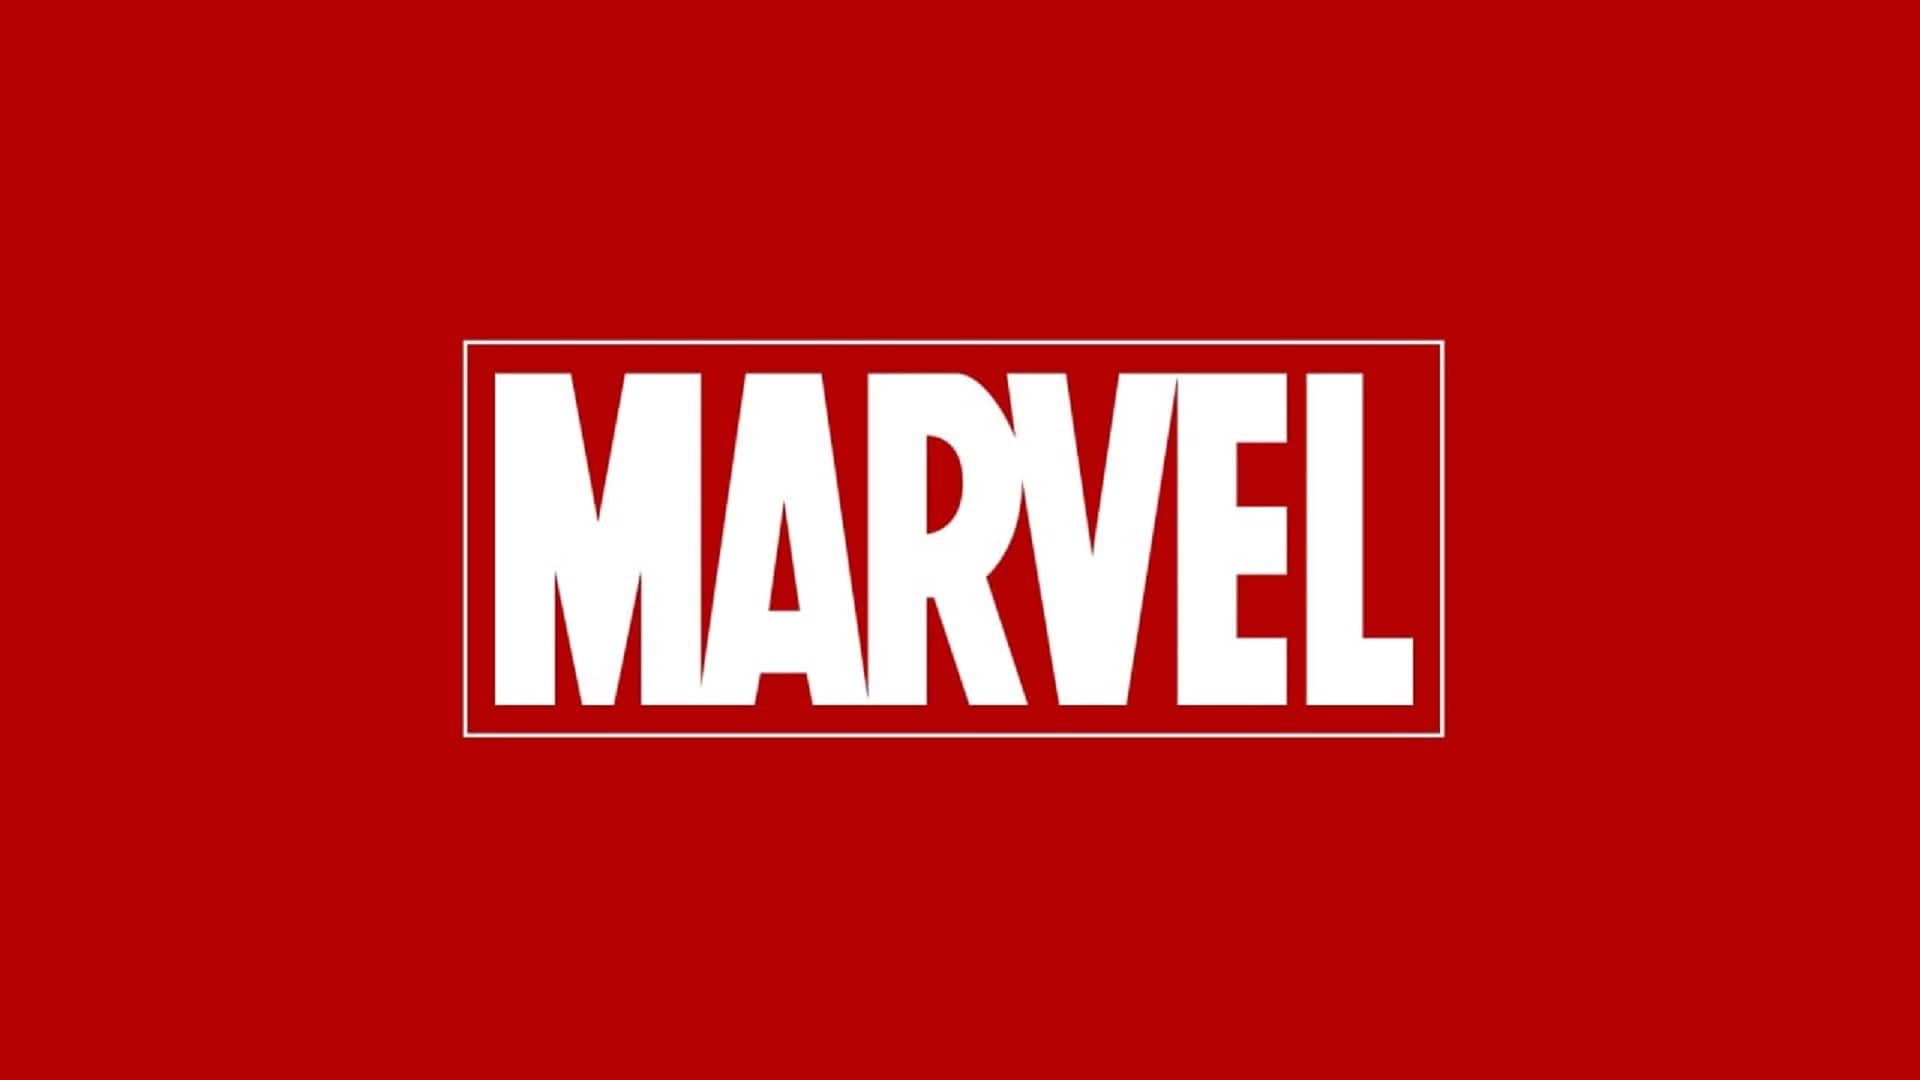 Images of the canceled Marvel MMO have appeared online, GamersRD